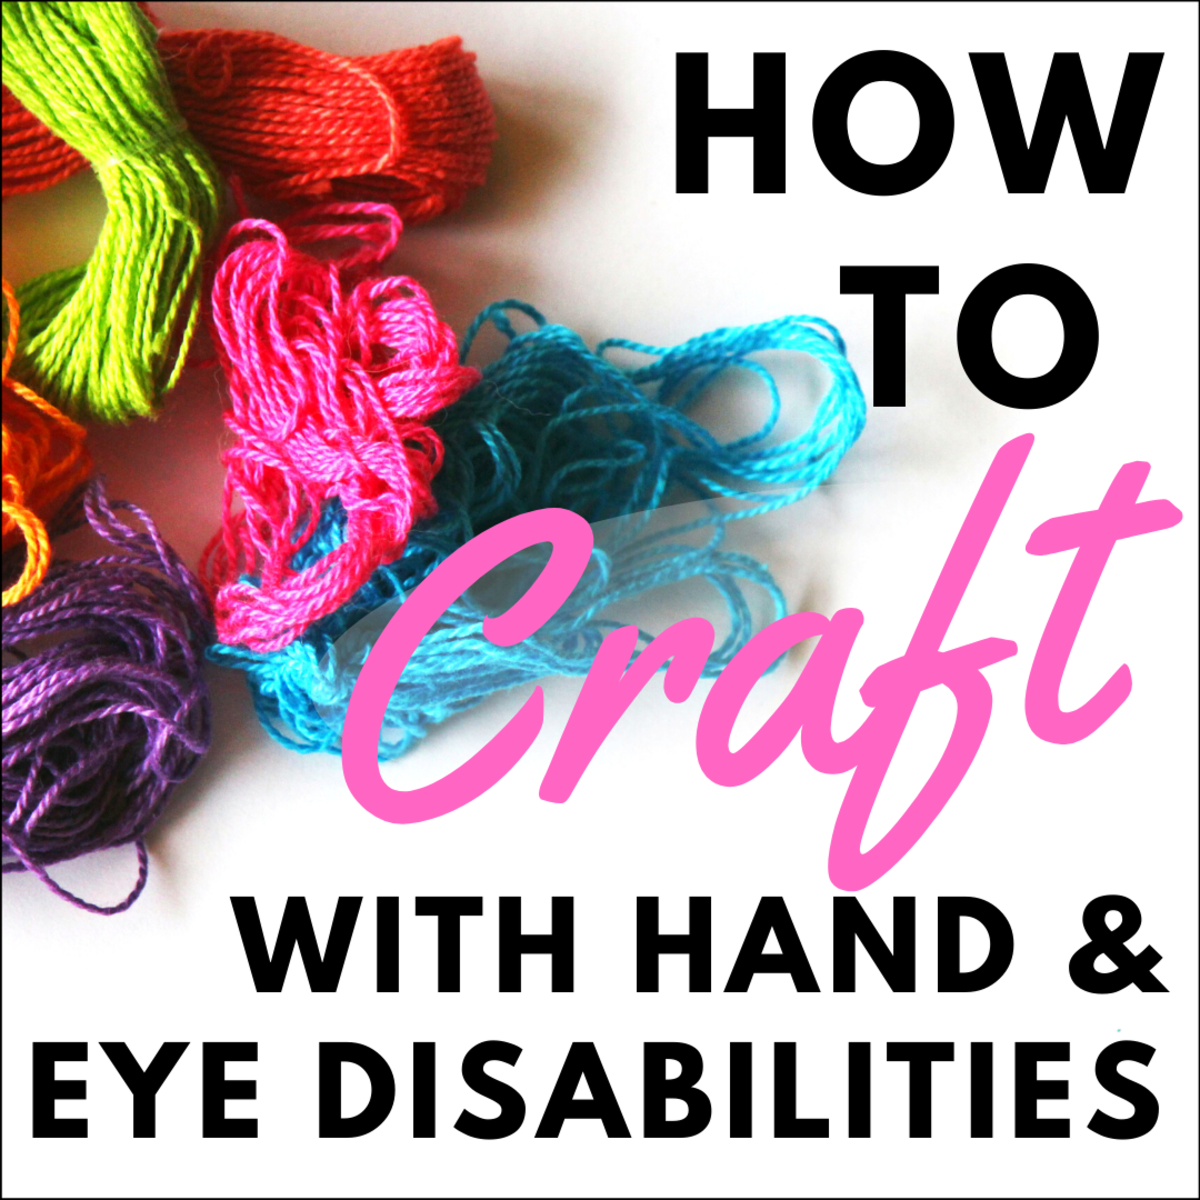 Tools to Help You Crochet or Knit With Disabilities